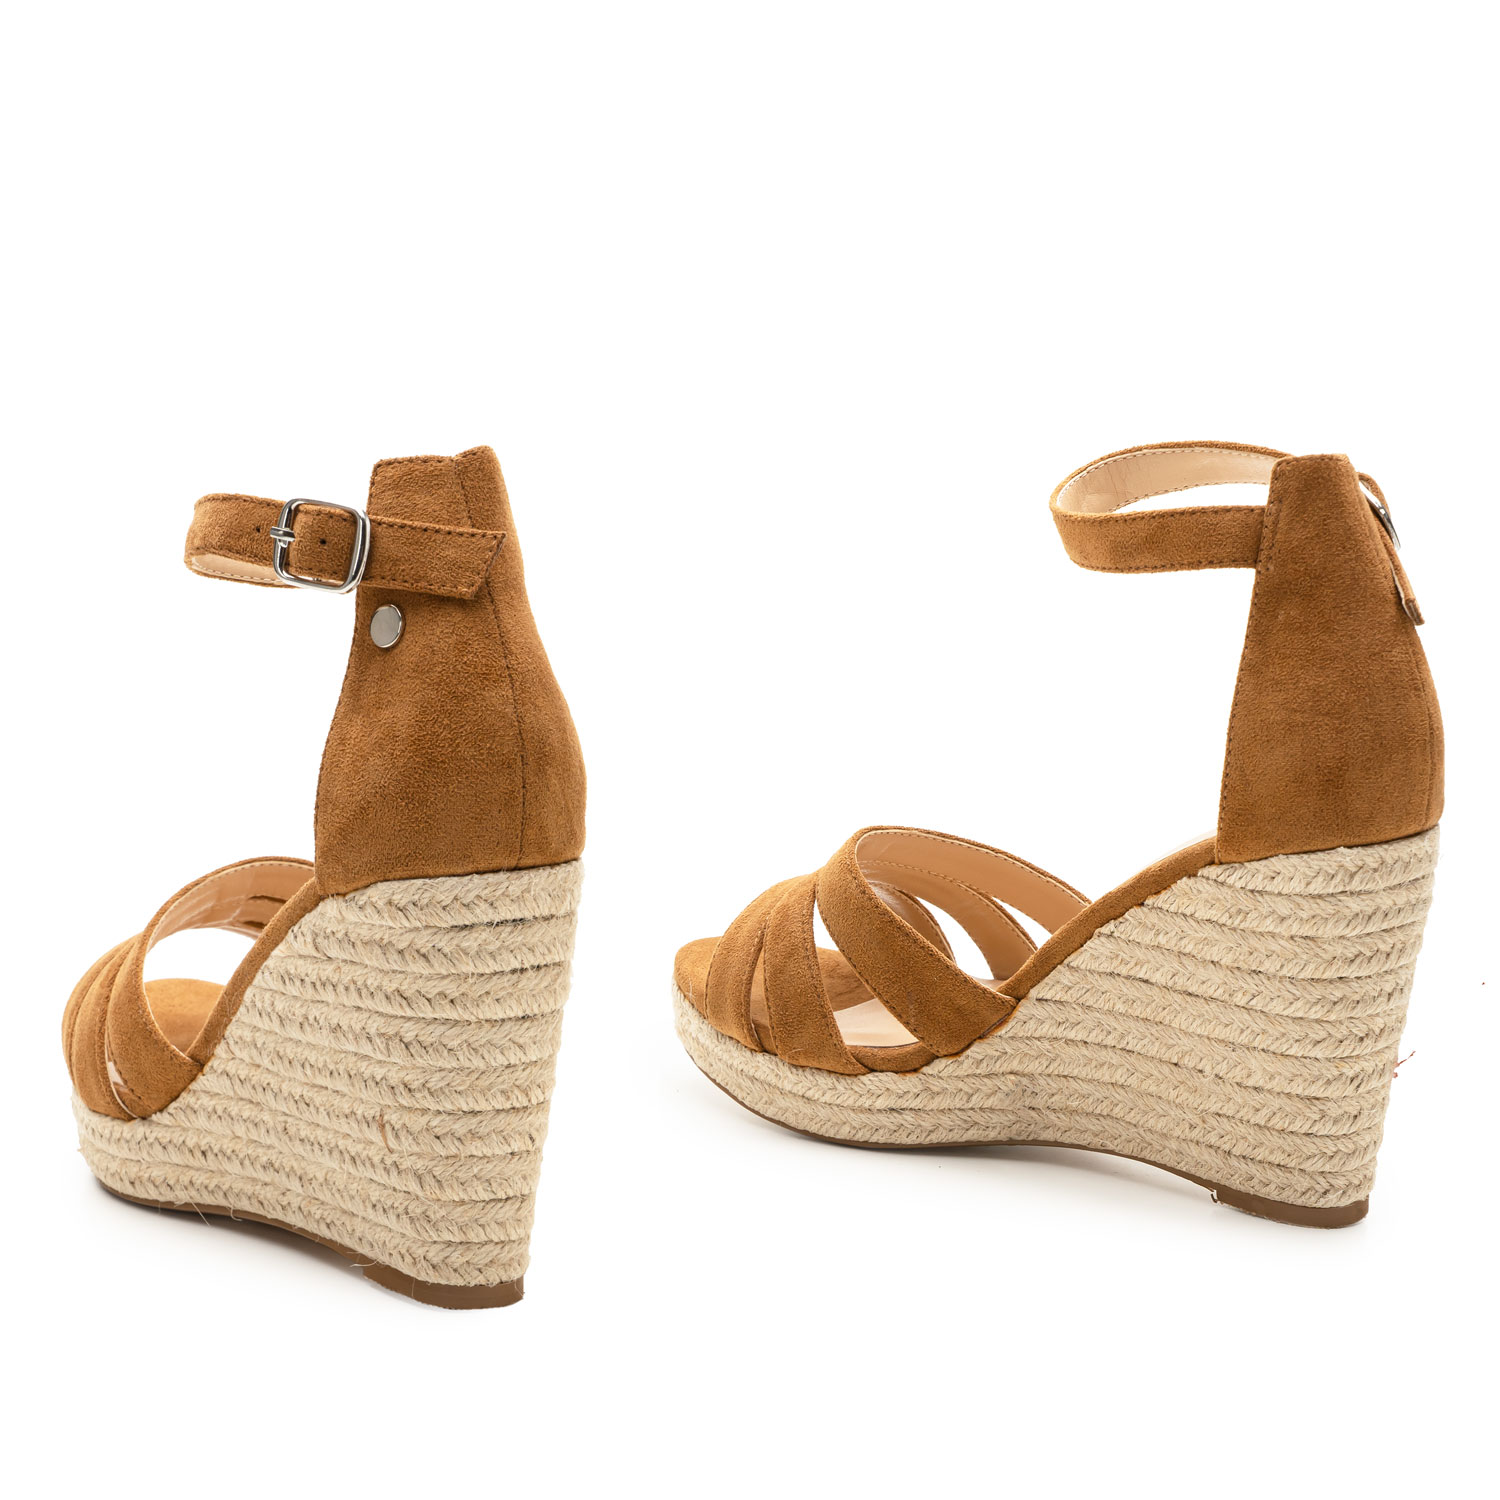 Camel Faux Suede Espadrilles with Jute Wedge 